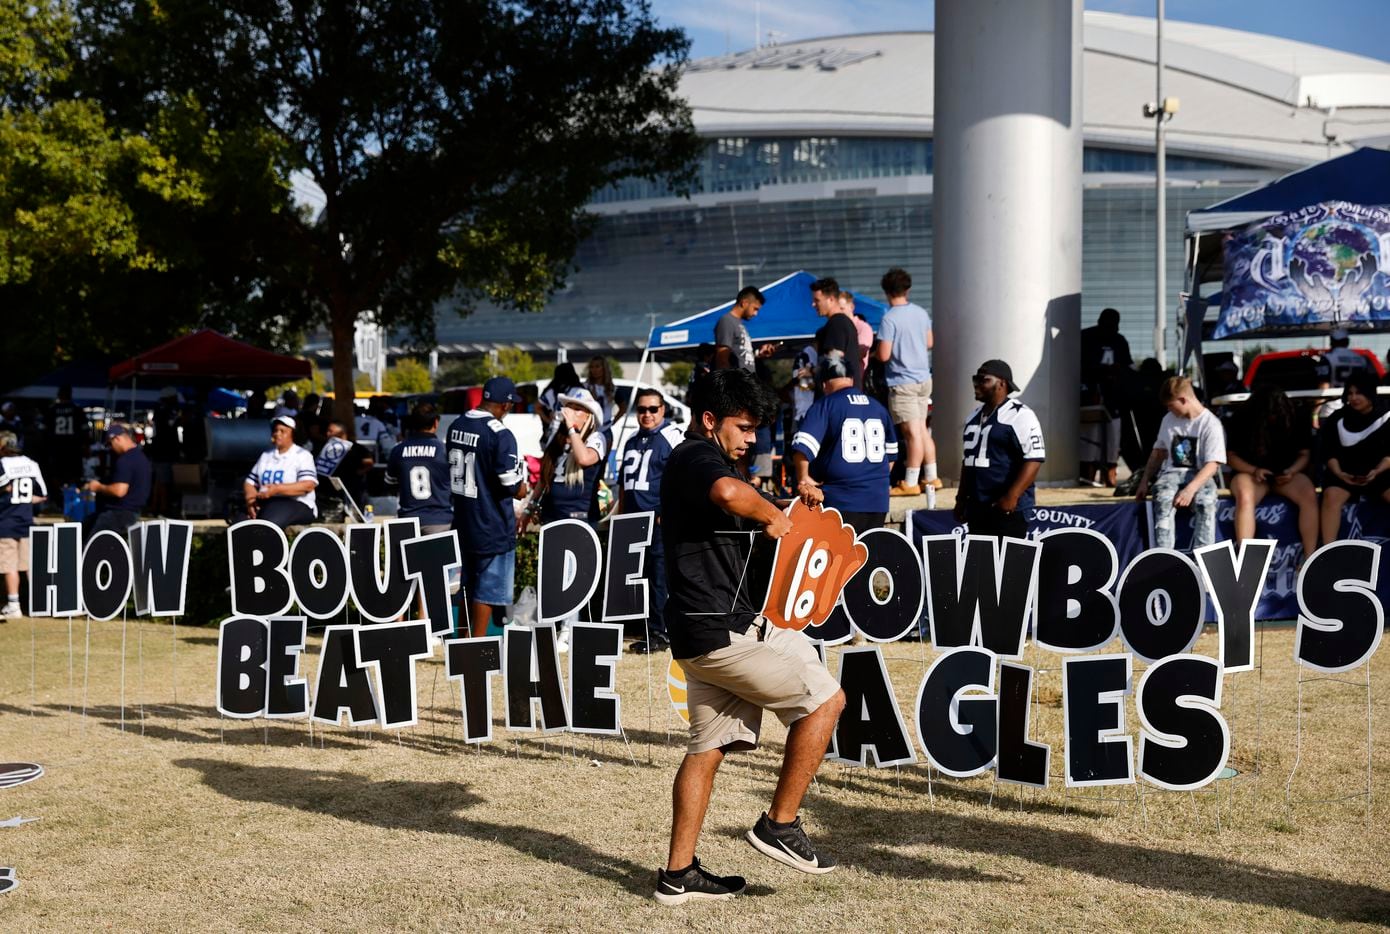 Dallas Cowboys fan Alex Perez of Dallas constructs a game day 'yard sign' display outside of AT&T Stadium in Arlington, Monday, September 27, 2021. He says he puts one up for every home opener. This one reads, How Bout Dem Cowboys, Beat The Eagles'. (Tom Fox/The Dallas Morning News)